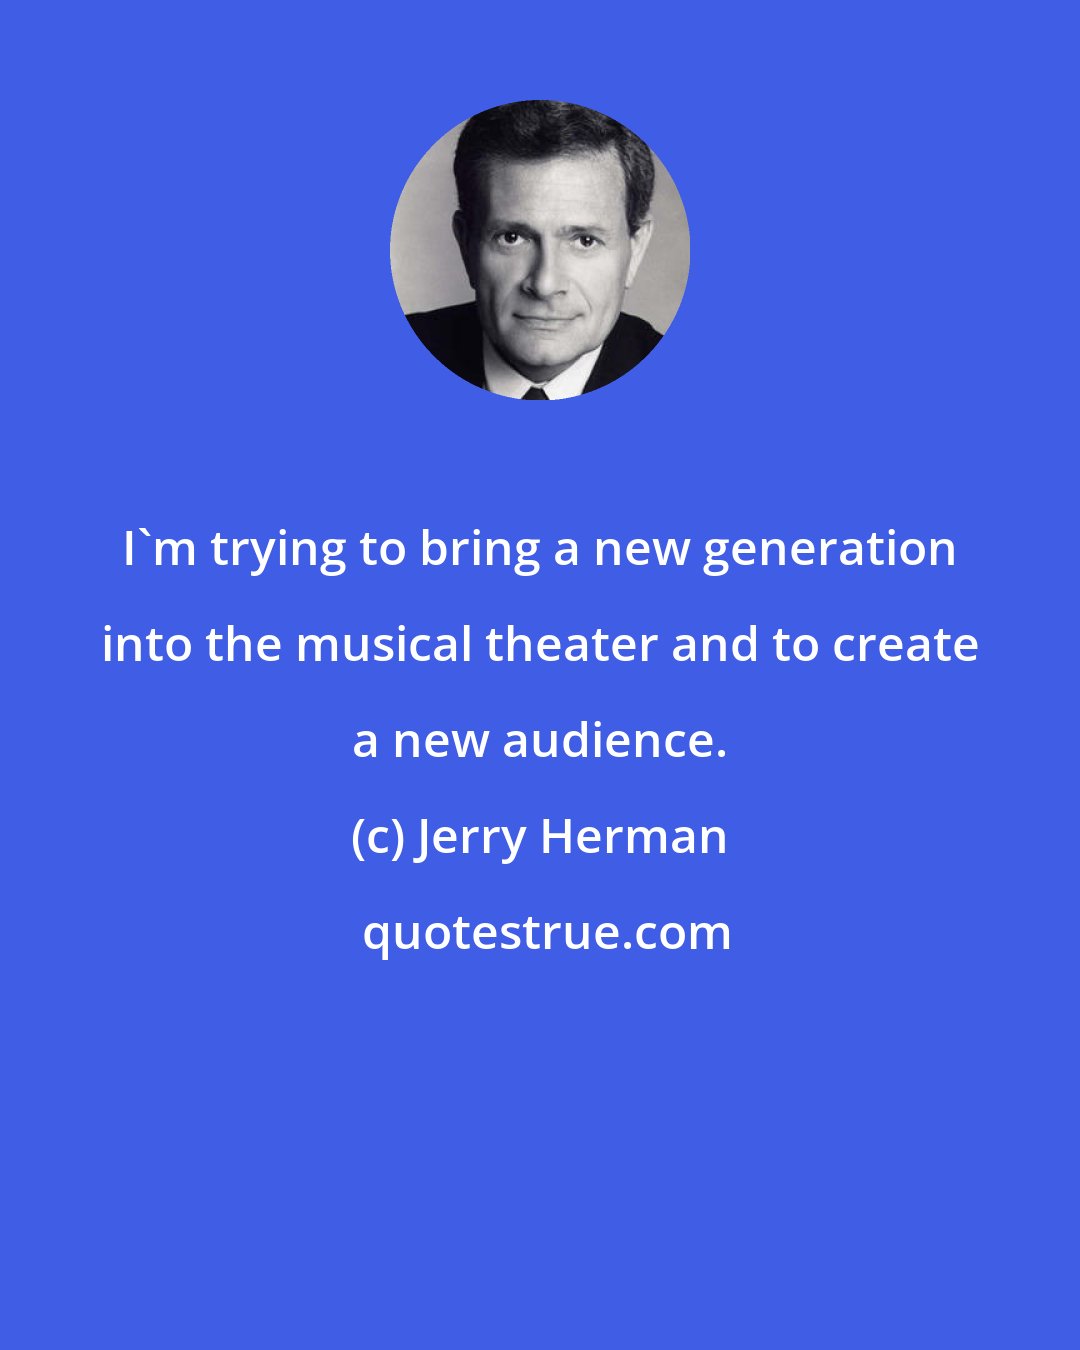 Jerry Herman: I'm trying to bring a new generation into the musical theater and to create a new audience.